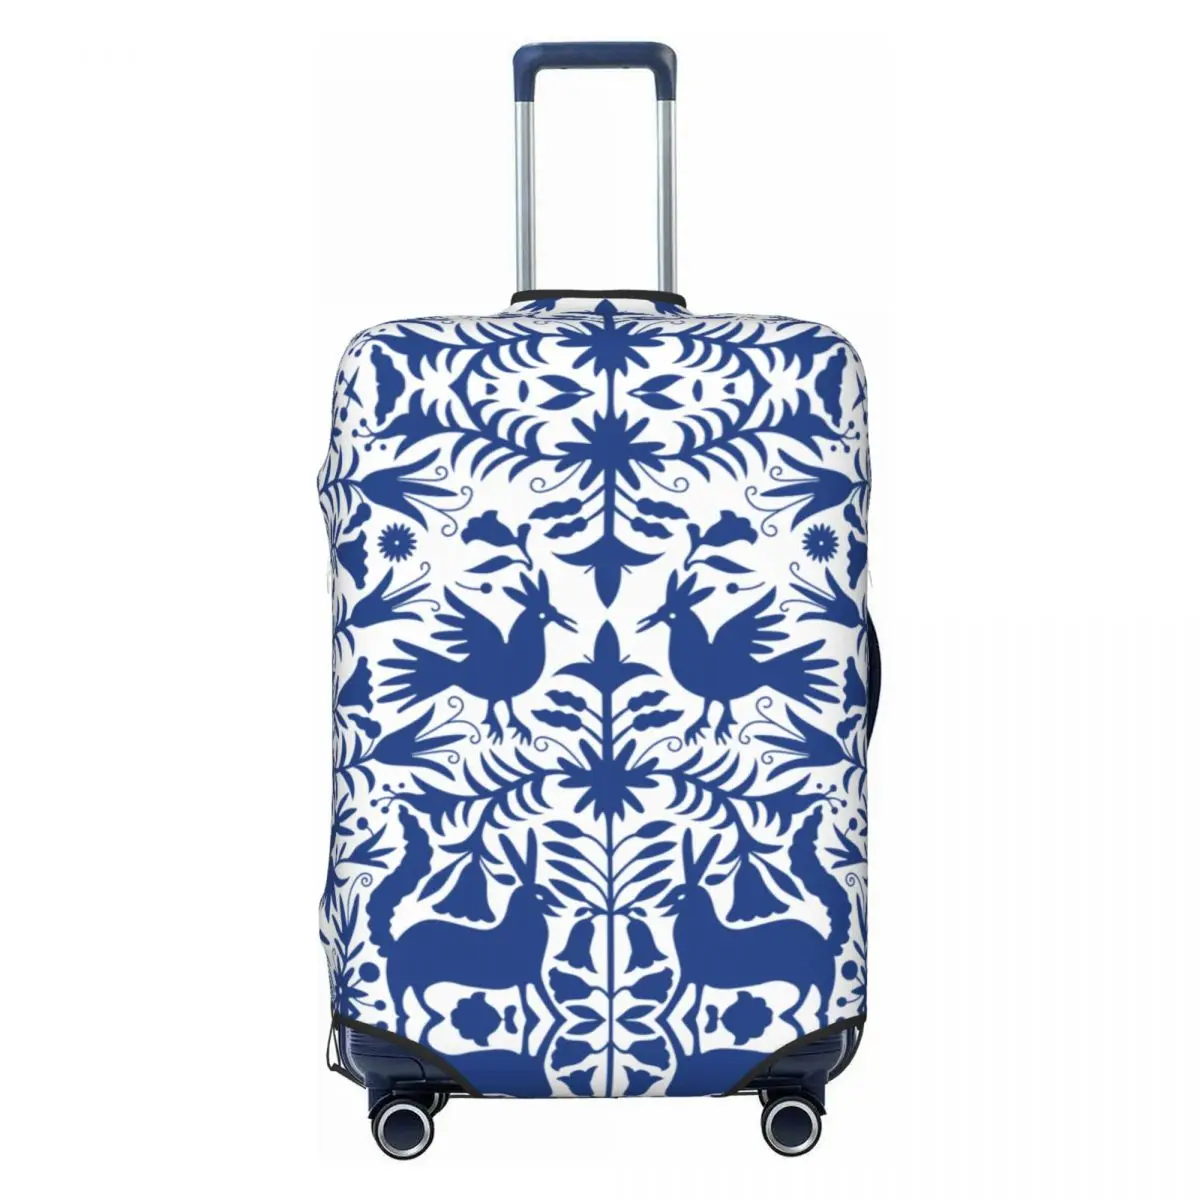 

Otomi Birds Mexican Flowers Luggage Cover Elastic Travel Suitcase Protective Covers Suit For 18-32 inch